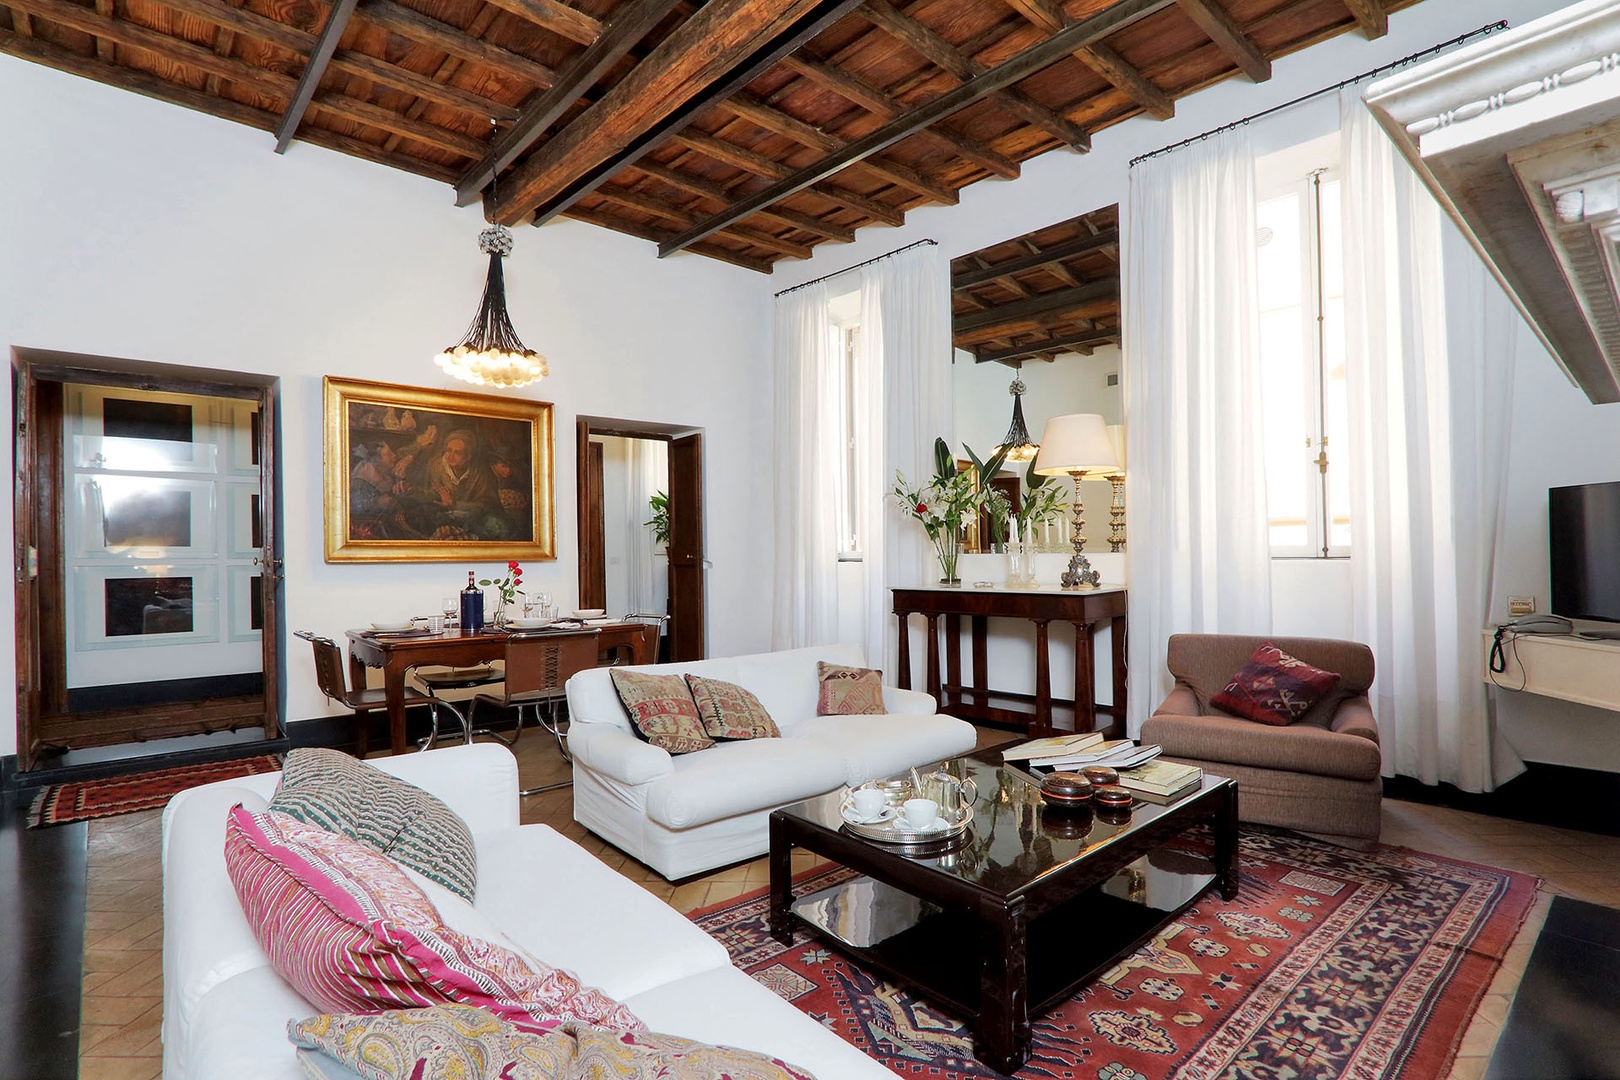 Living room 2 is filled with light from two large windows which overlook Via Bocca di Leone.